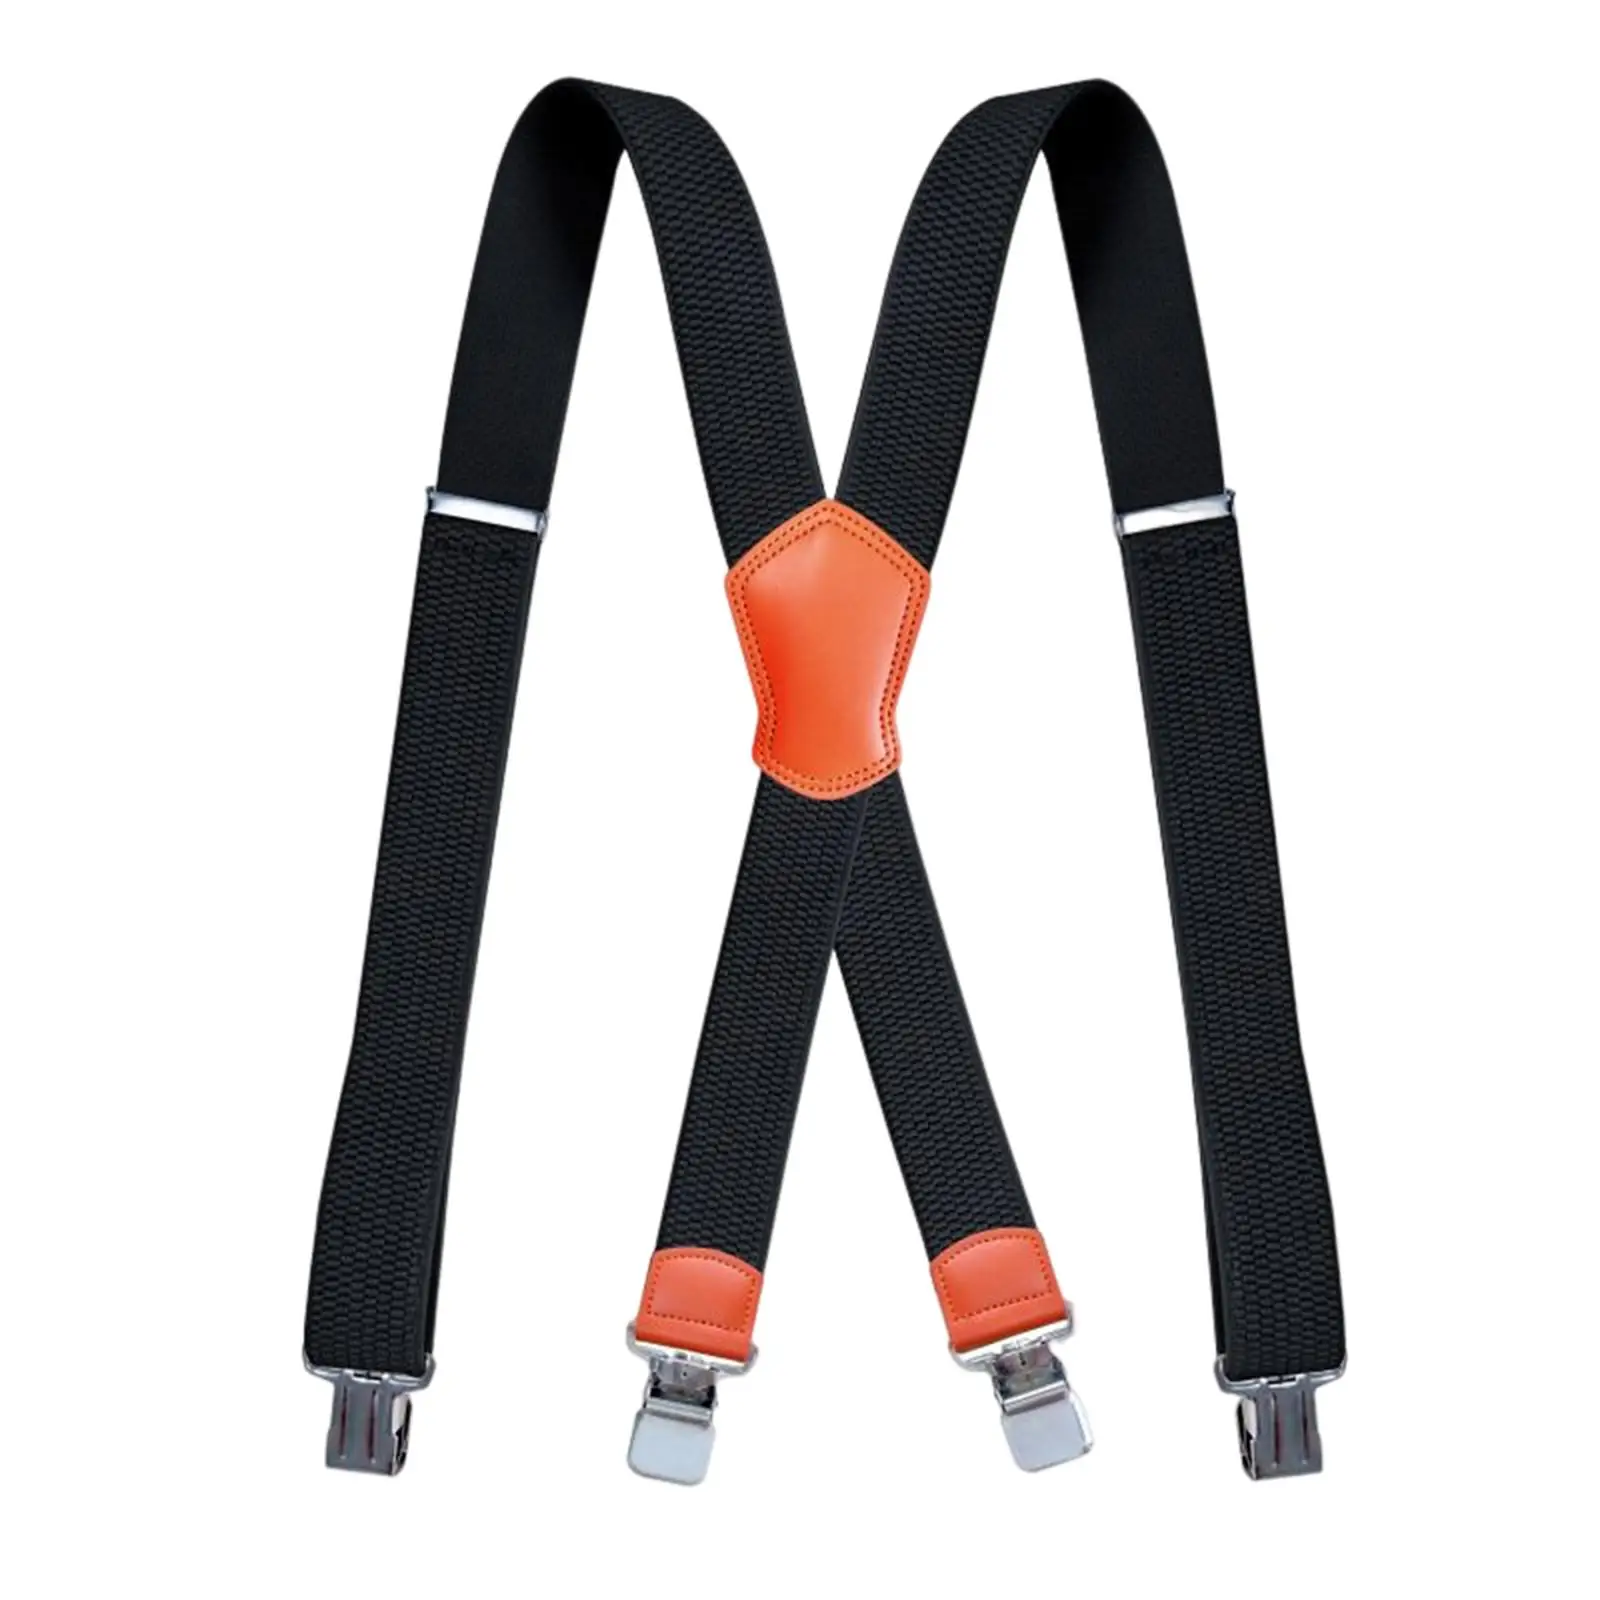 Stylish Unisex Suspenders with Sturdy Metal Clips for Men and Women